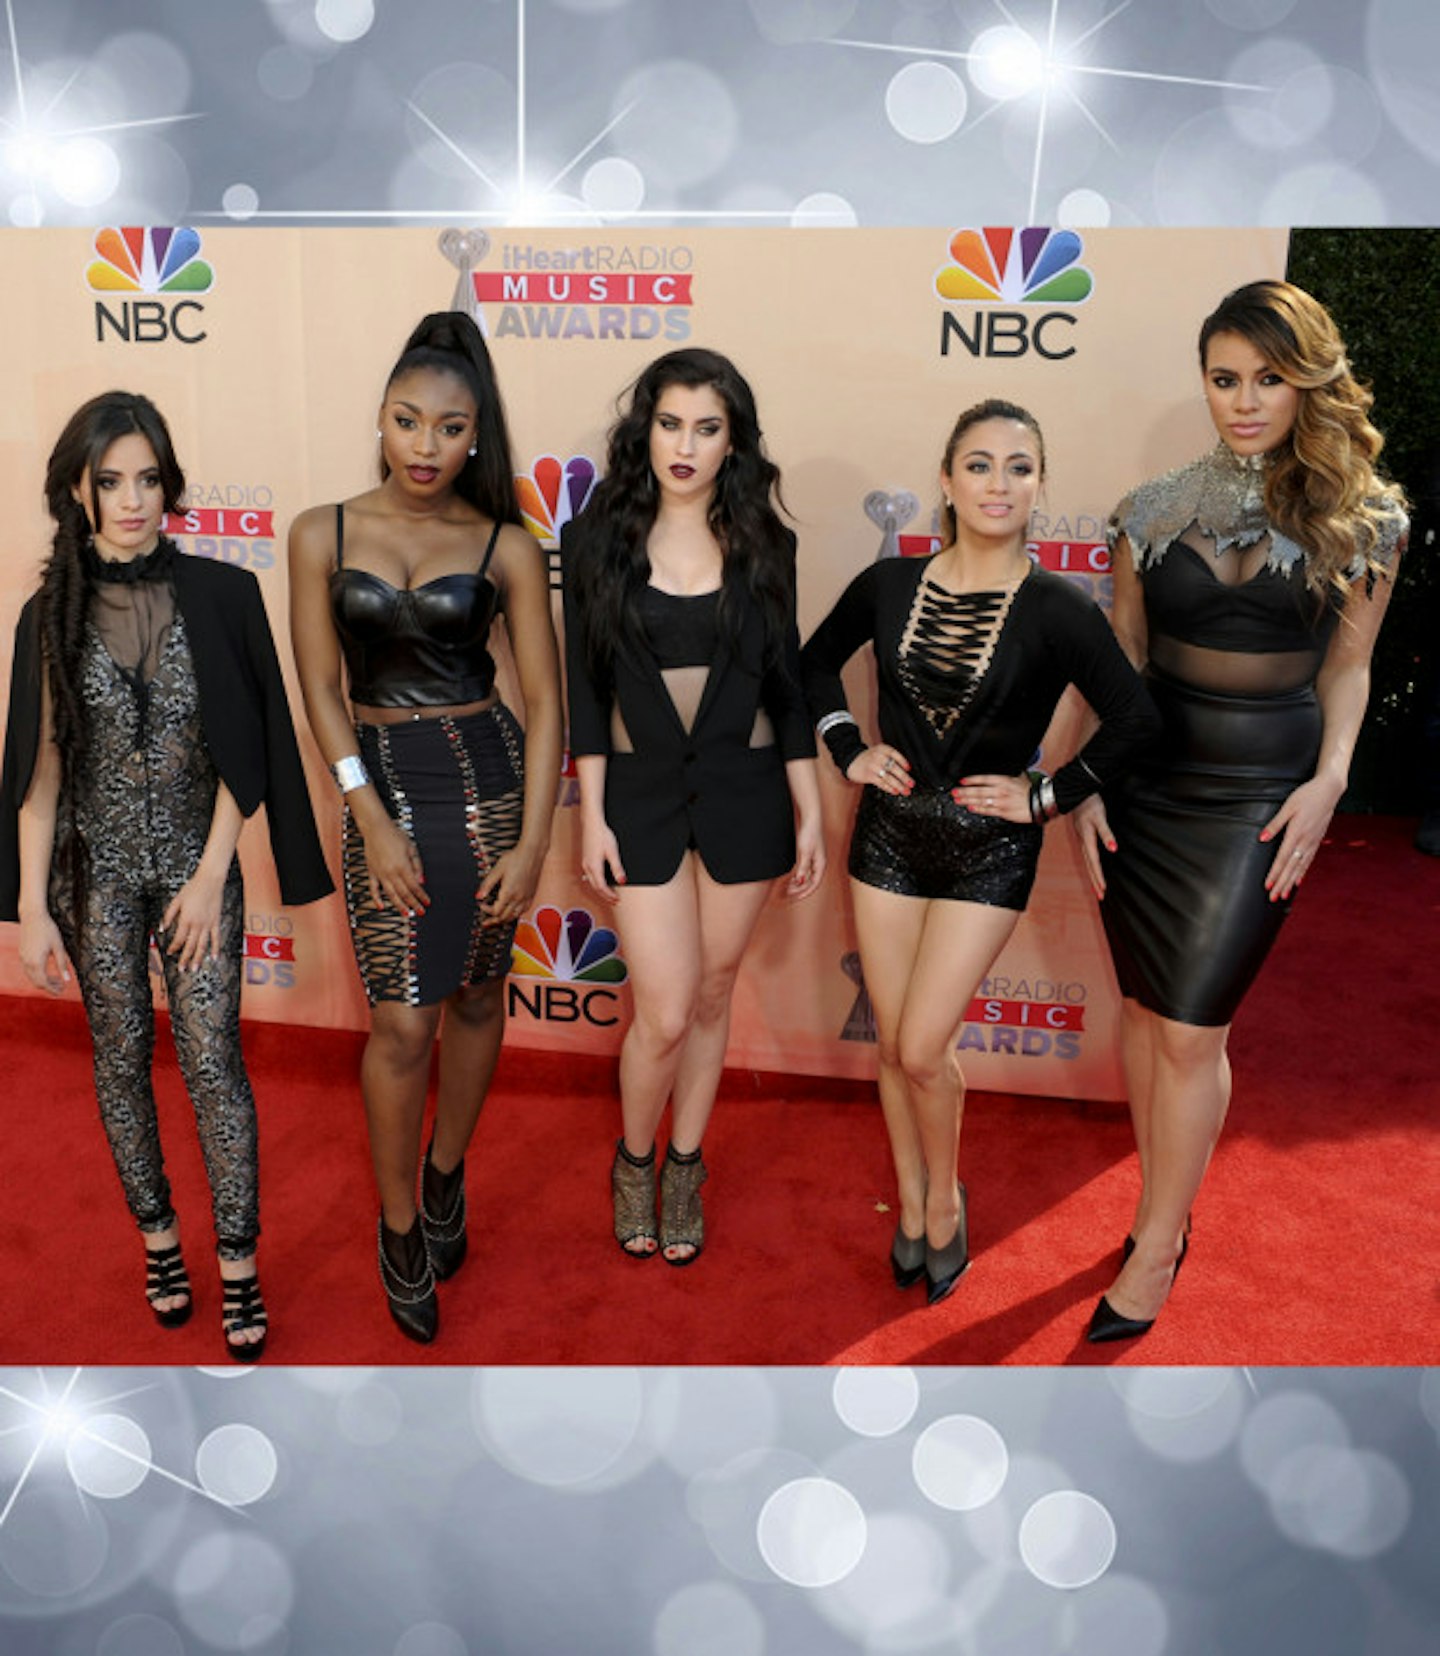 iheart-music-radio-awards-outfits-fifth-harmony-black-outfits